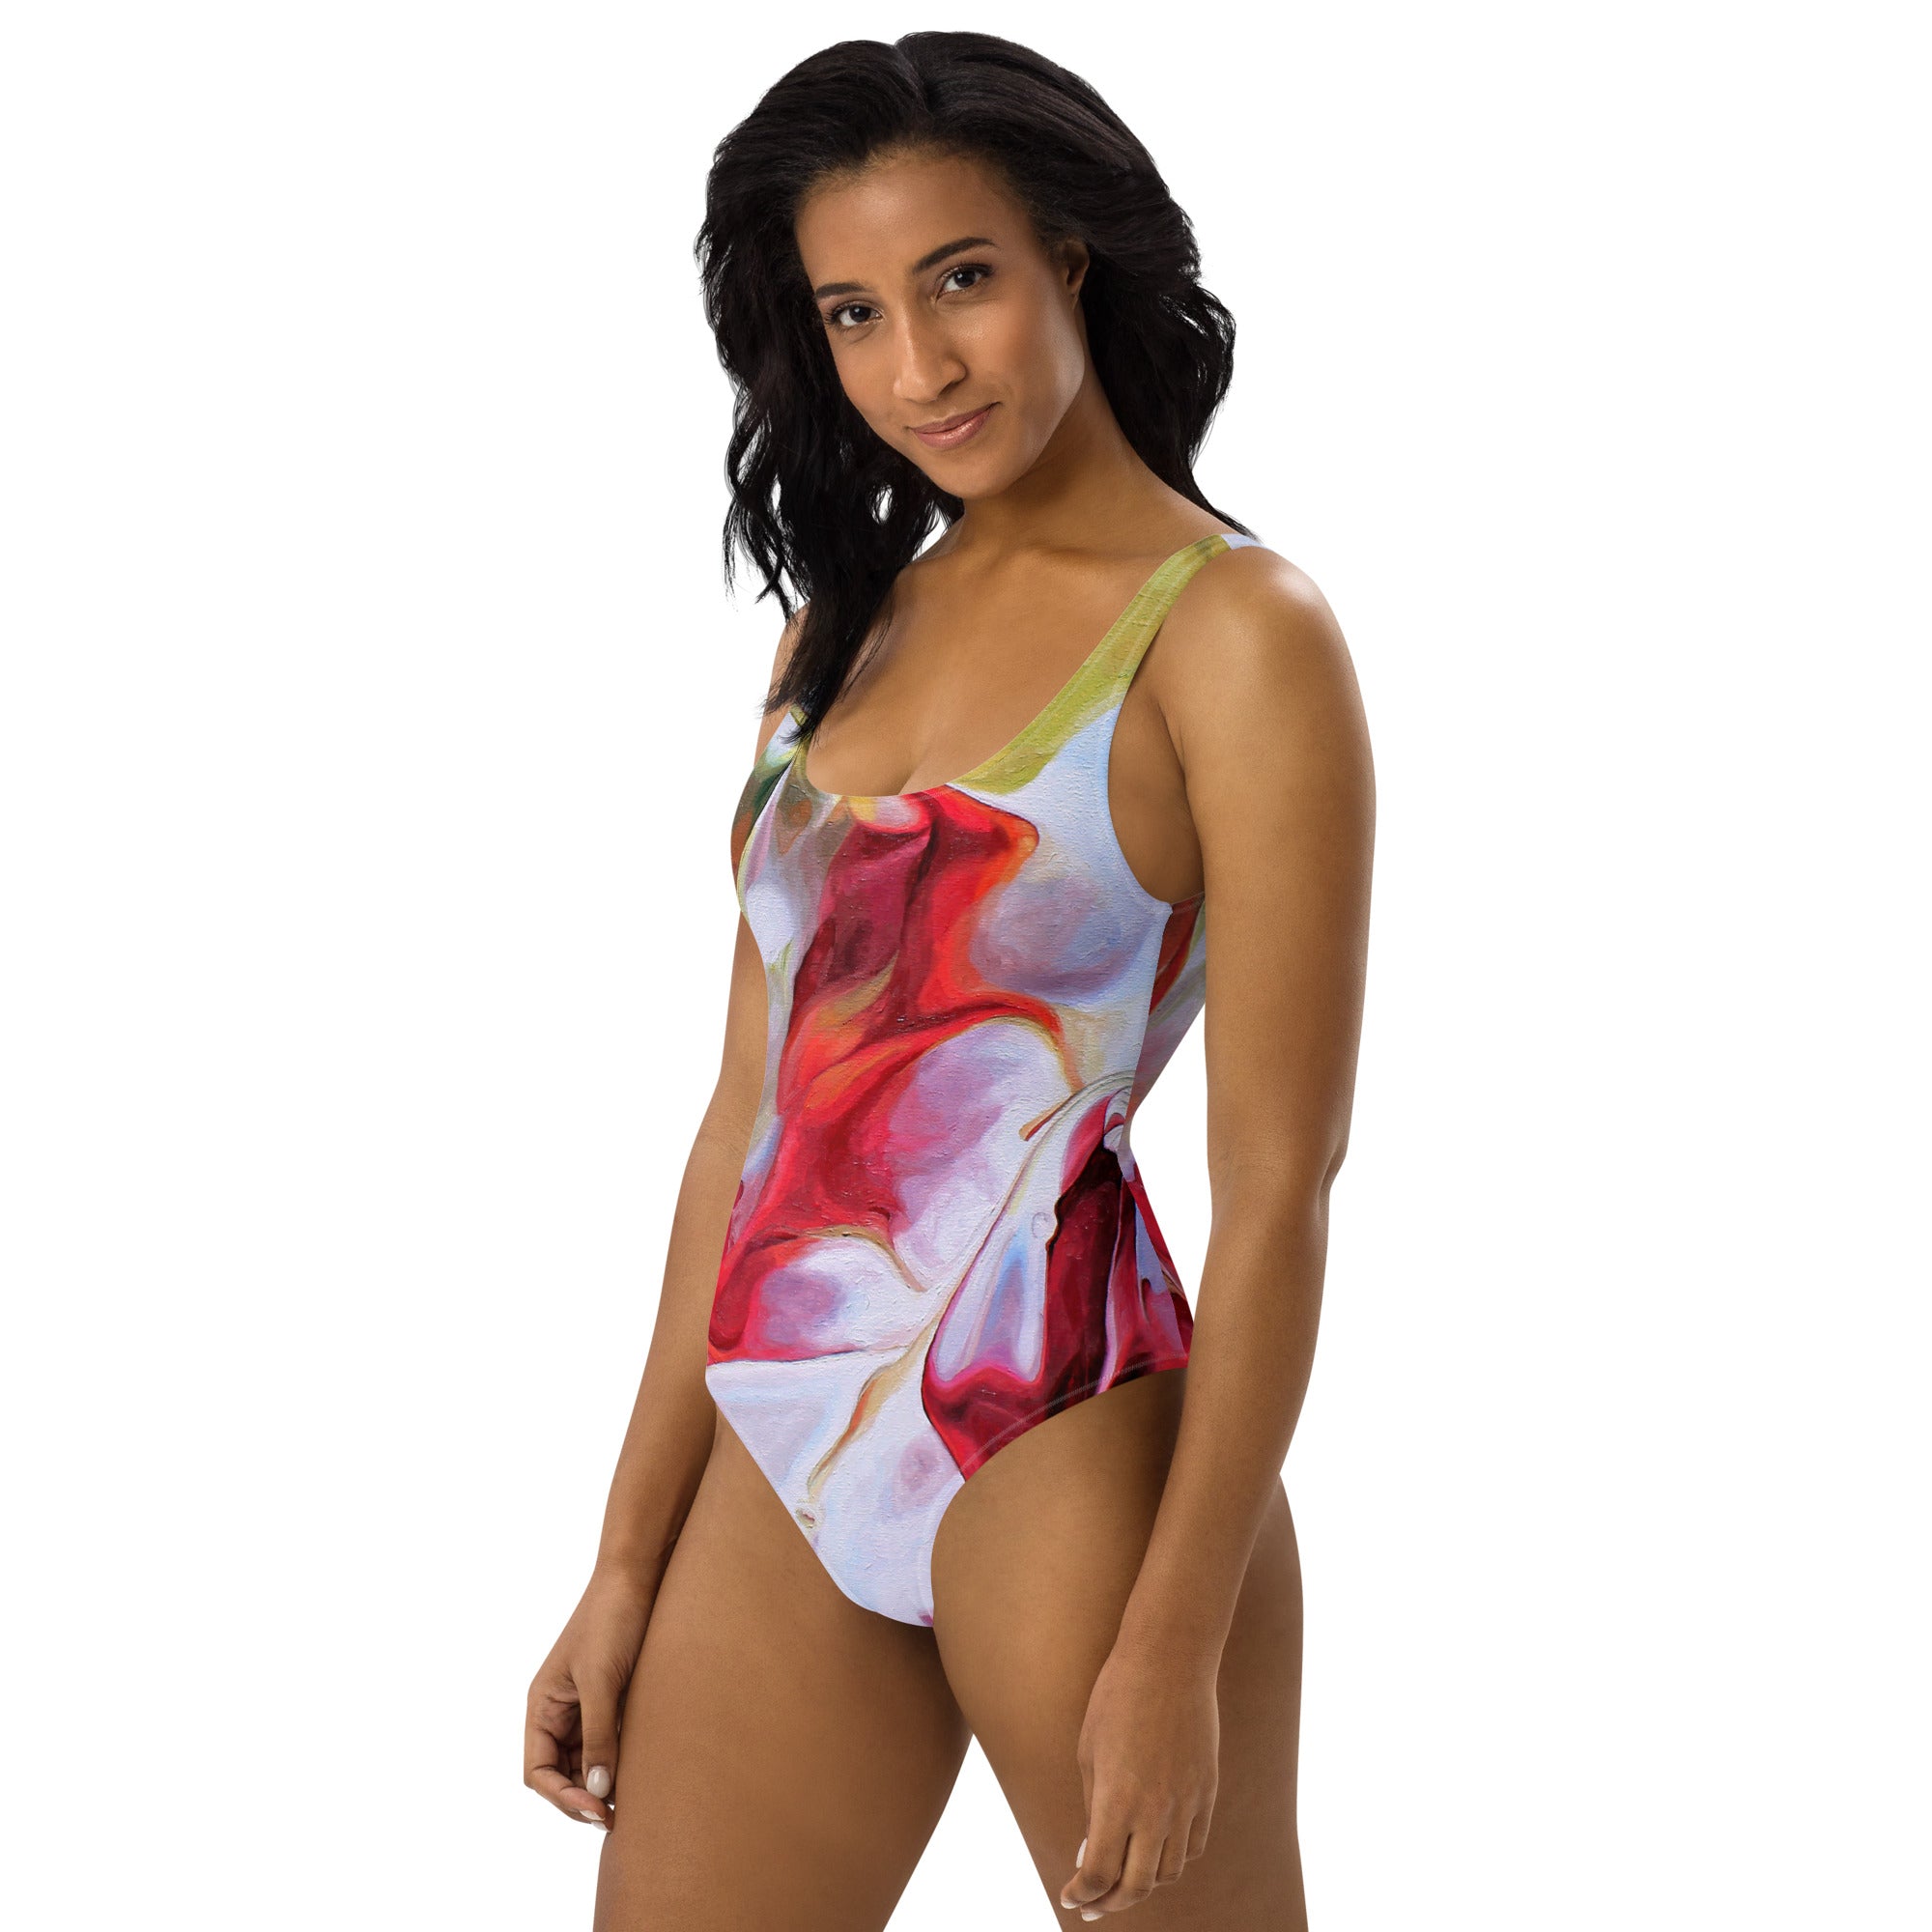 Possibilities One-Piece Swimsuit